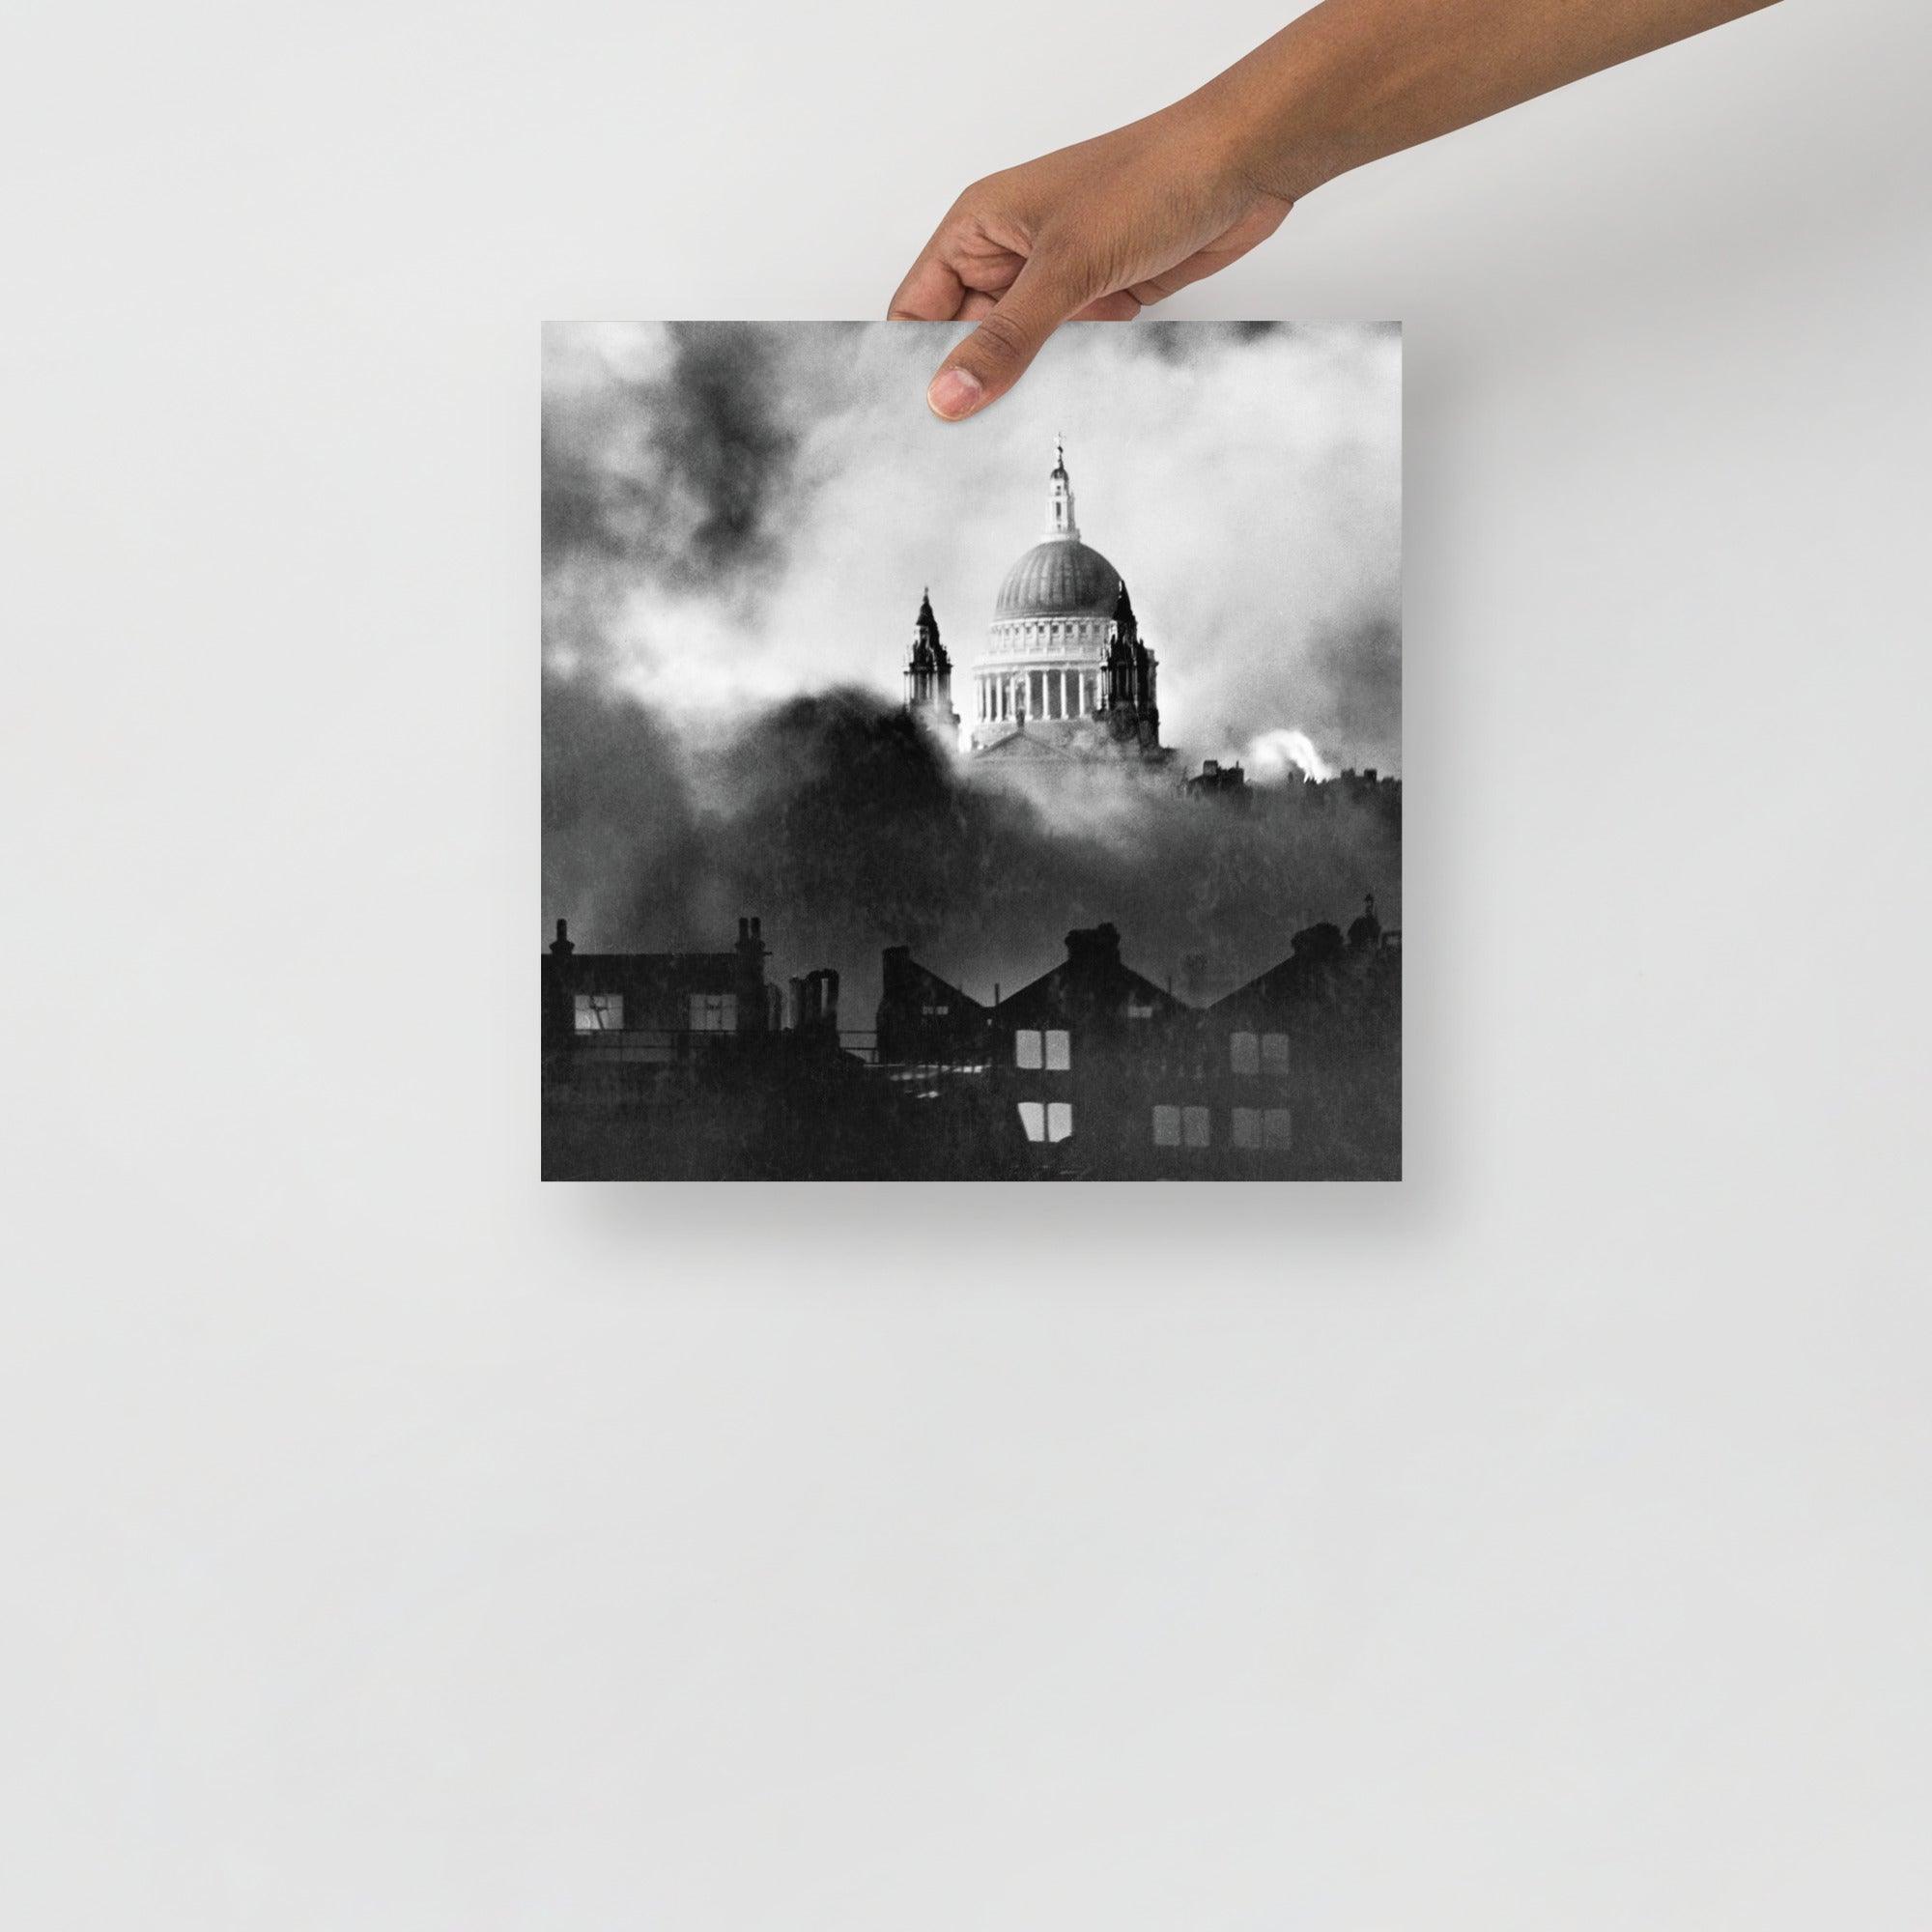 A St Paul's Survives poster on a plain backdrop in size 12x12”.